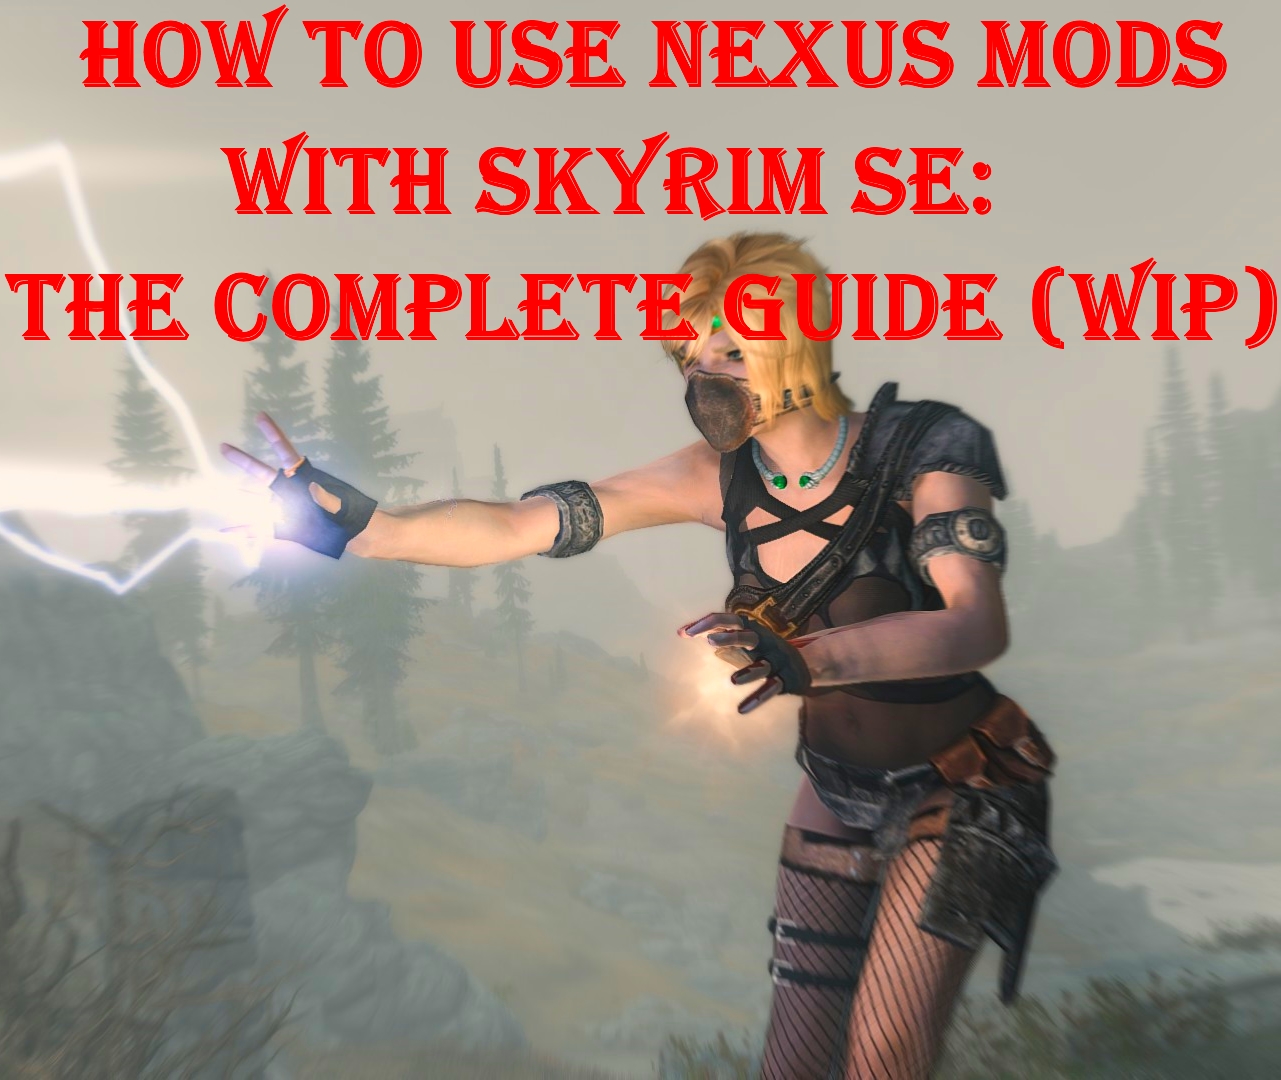 The Pros and Cons of Steam Workshop, Nexus Mods, ModDB, and Others